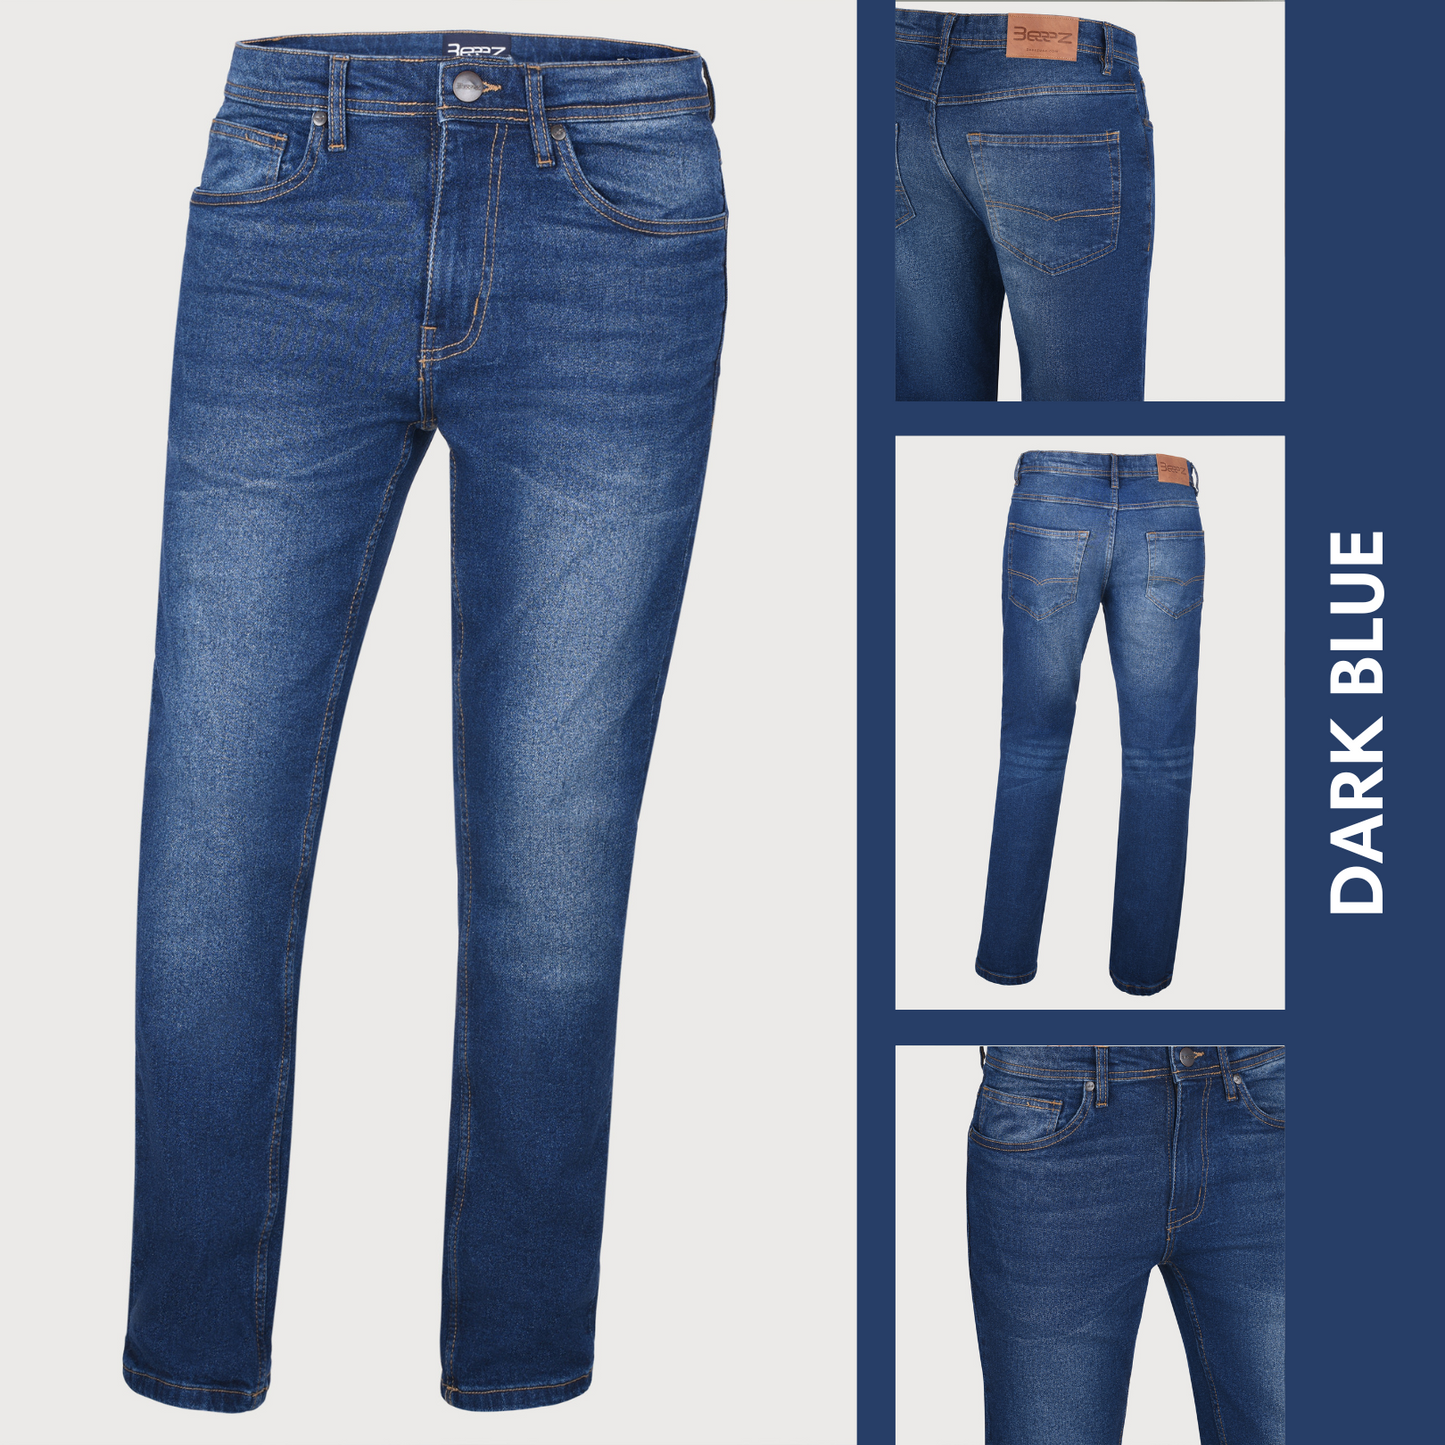 100% Denim Jeans - Available In 3 Shades Of Blue